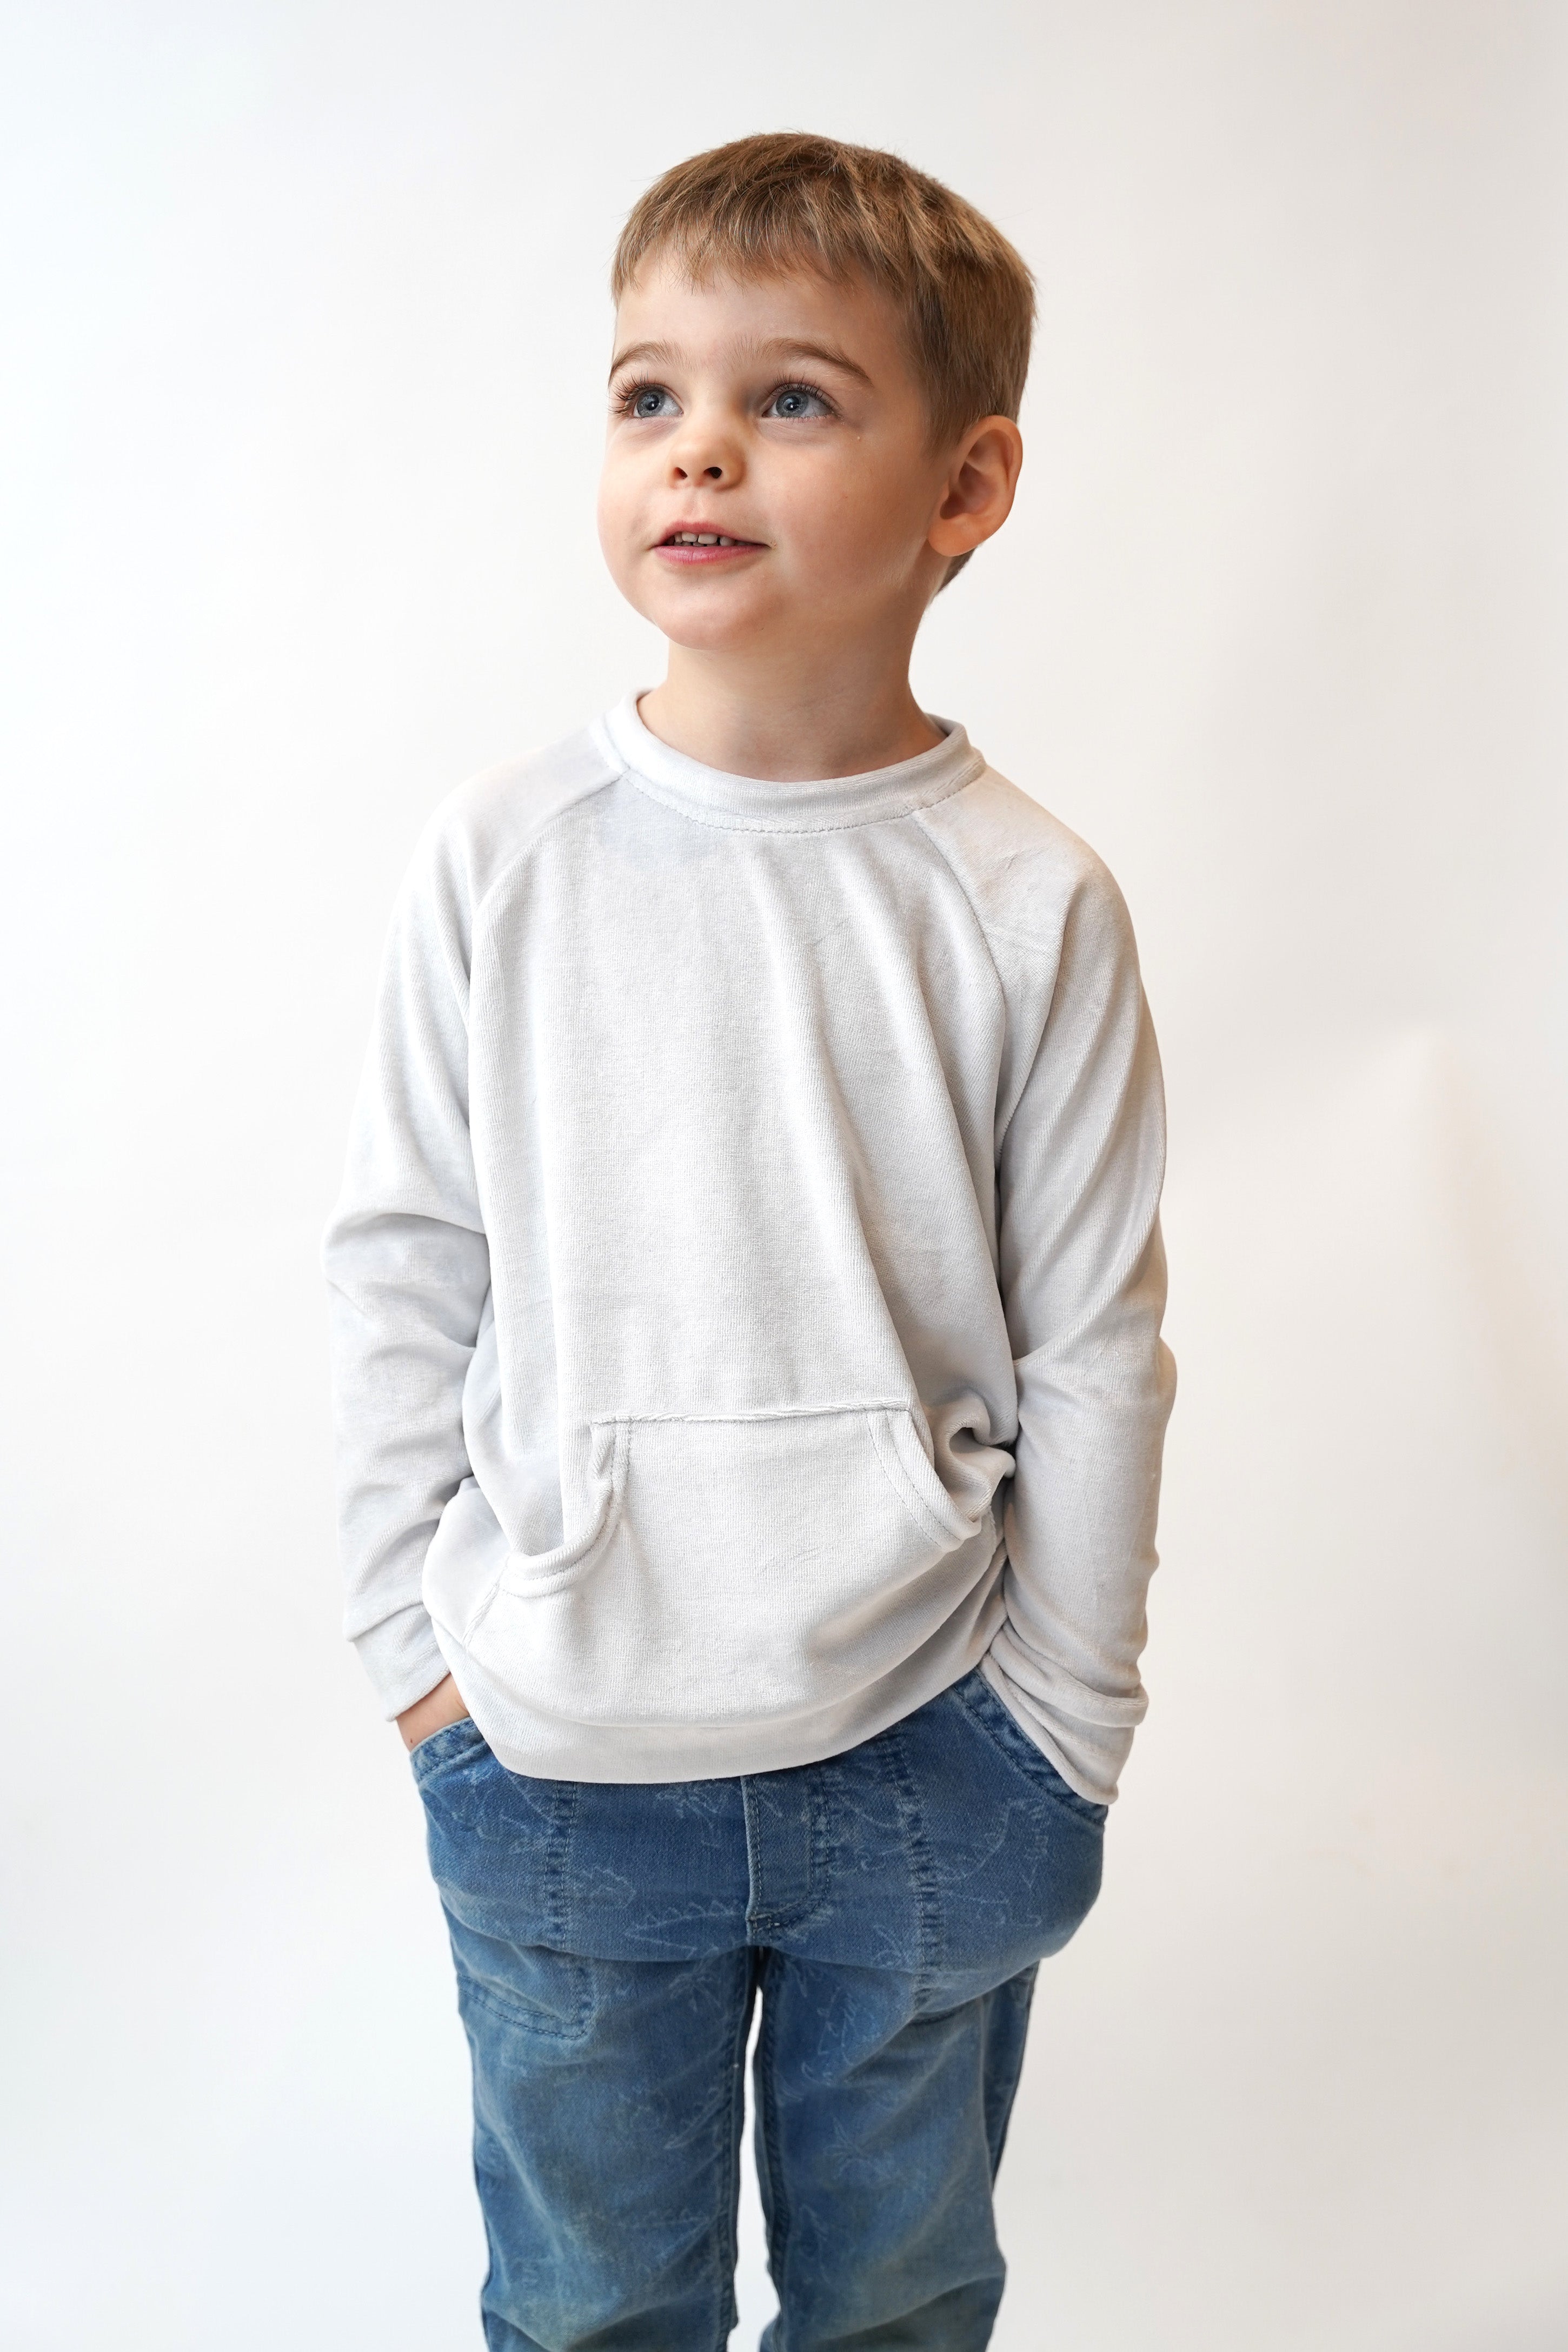 The Mini Ultimate Sweater for Kids